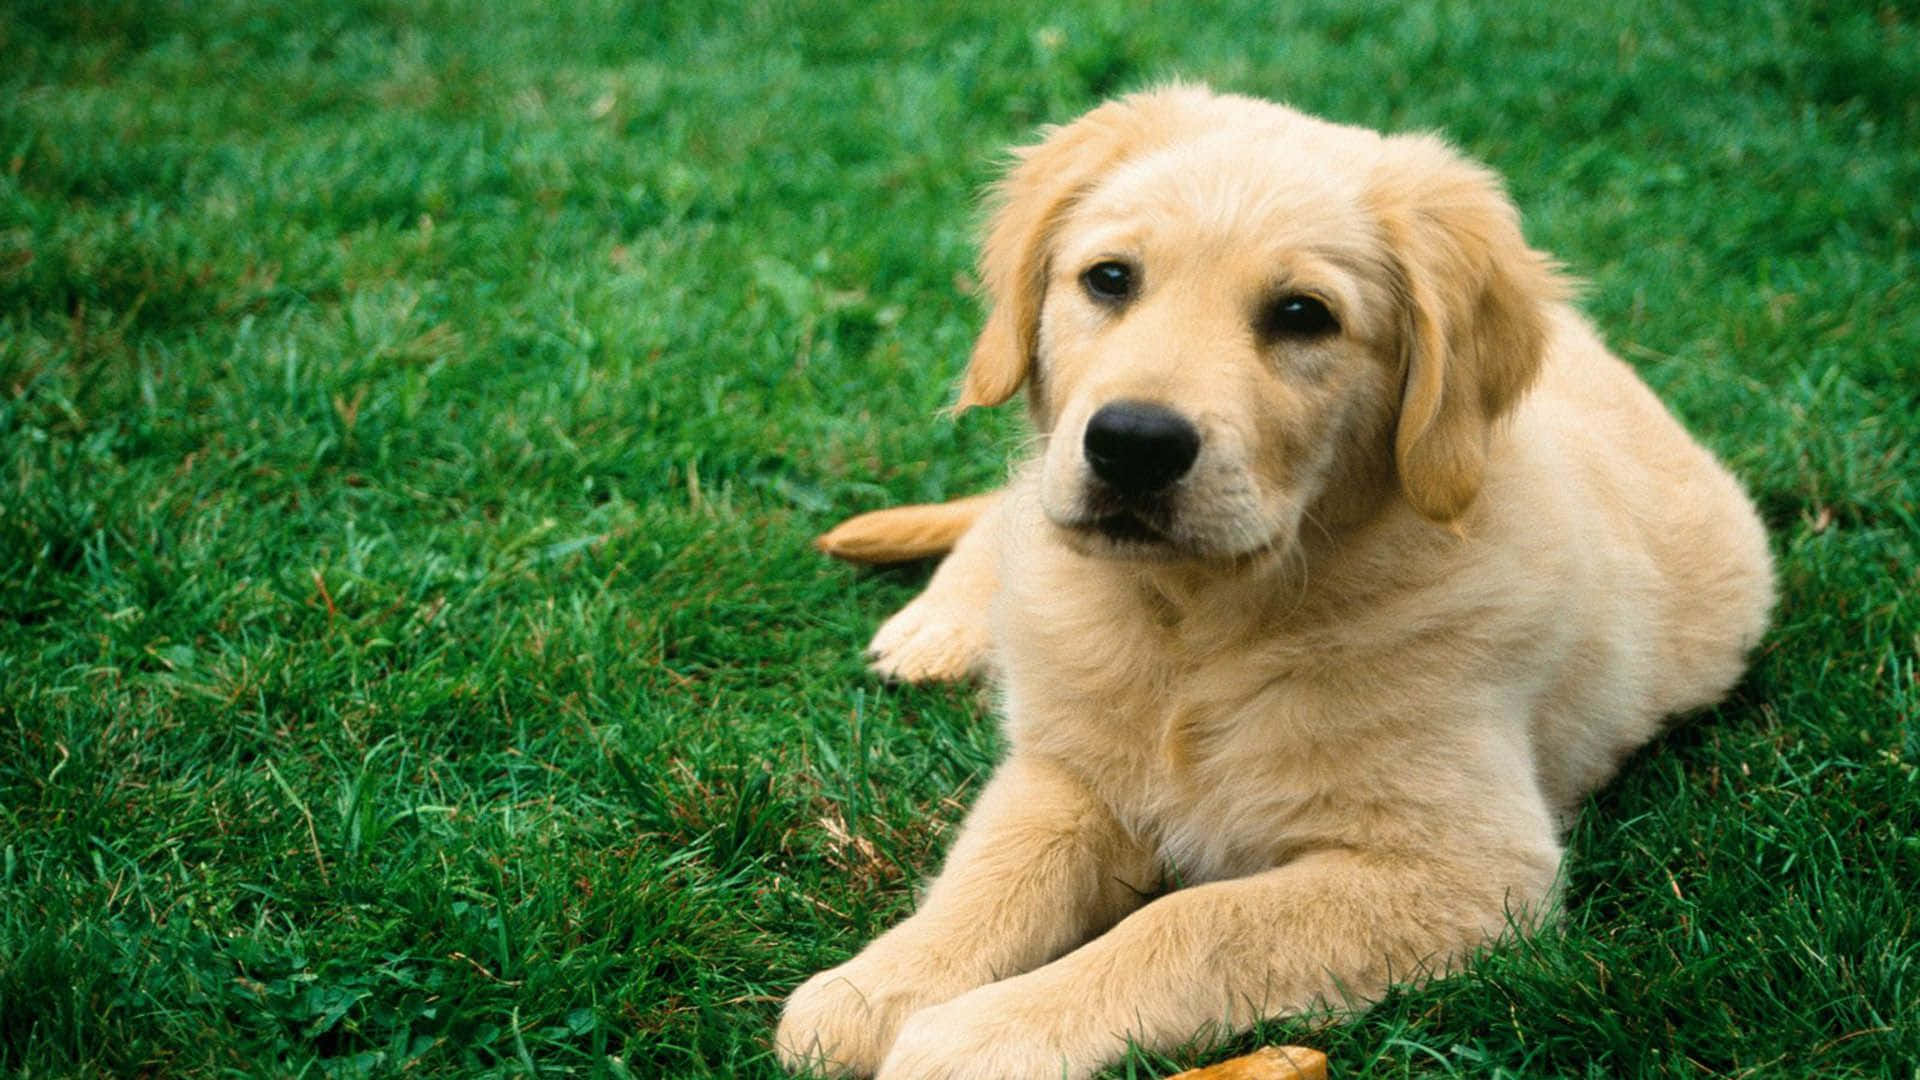 Cool Dog Golden Retriever On The Grass Background